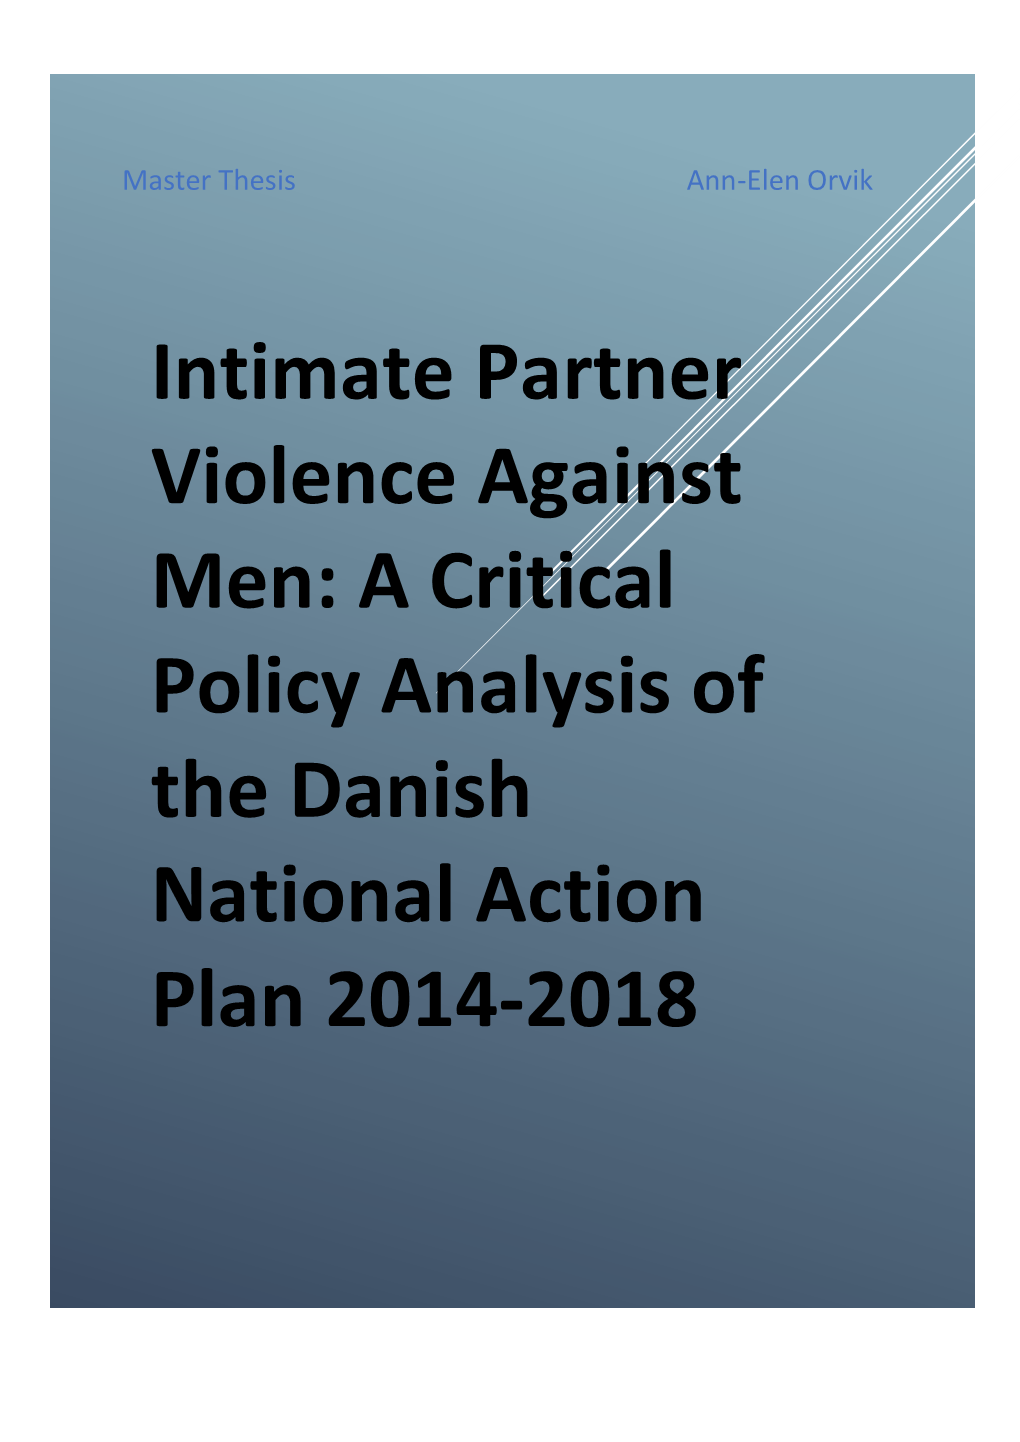 Intimate Partner Violence Against Men: a Critical Policy Analysis of the Danish National Action Plan 2014-2018